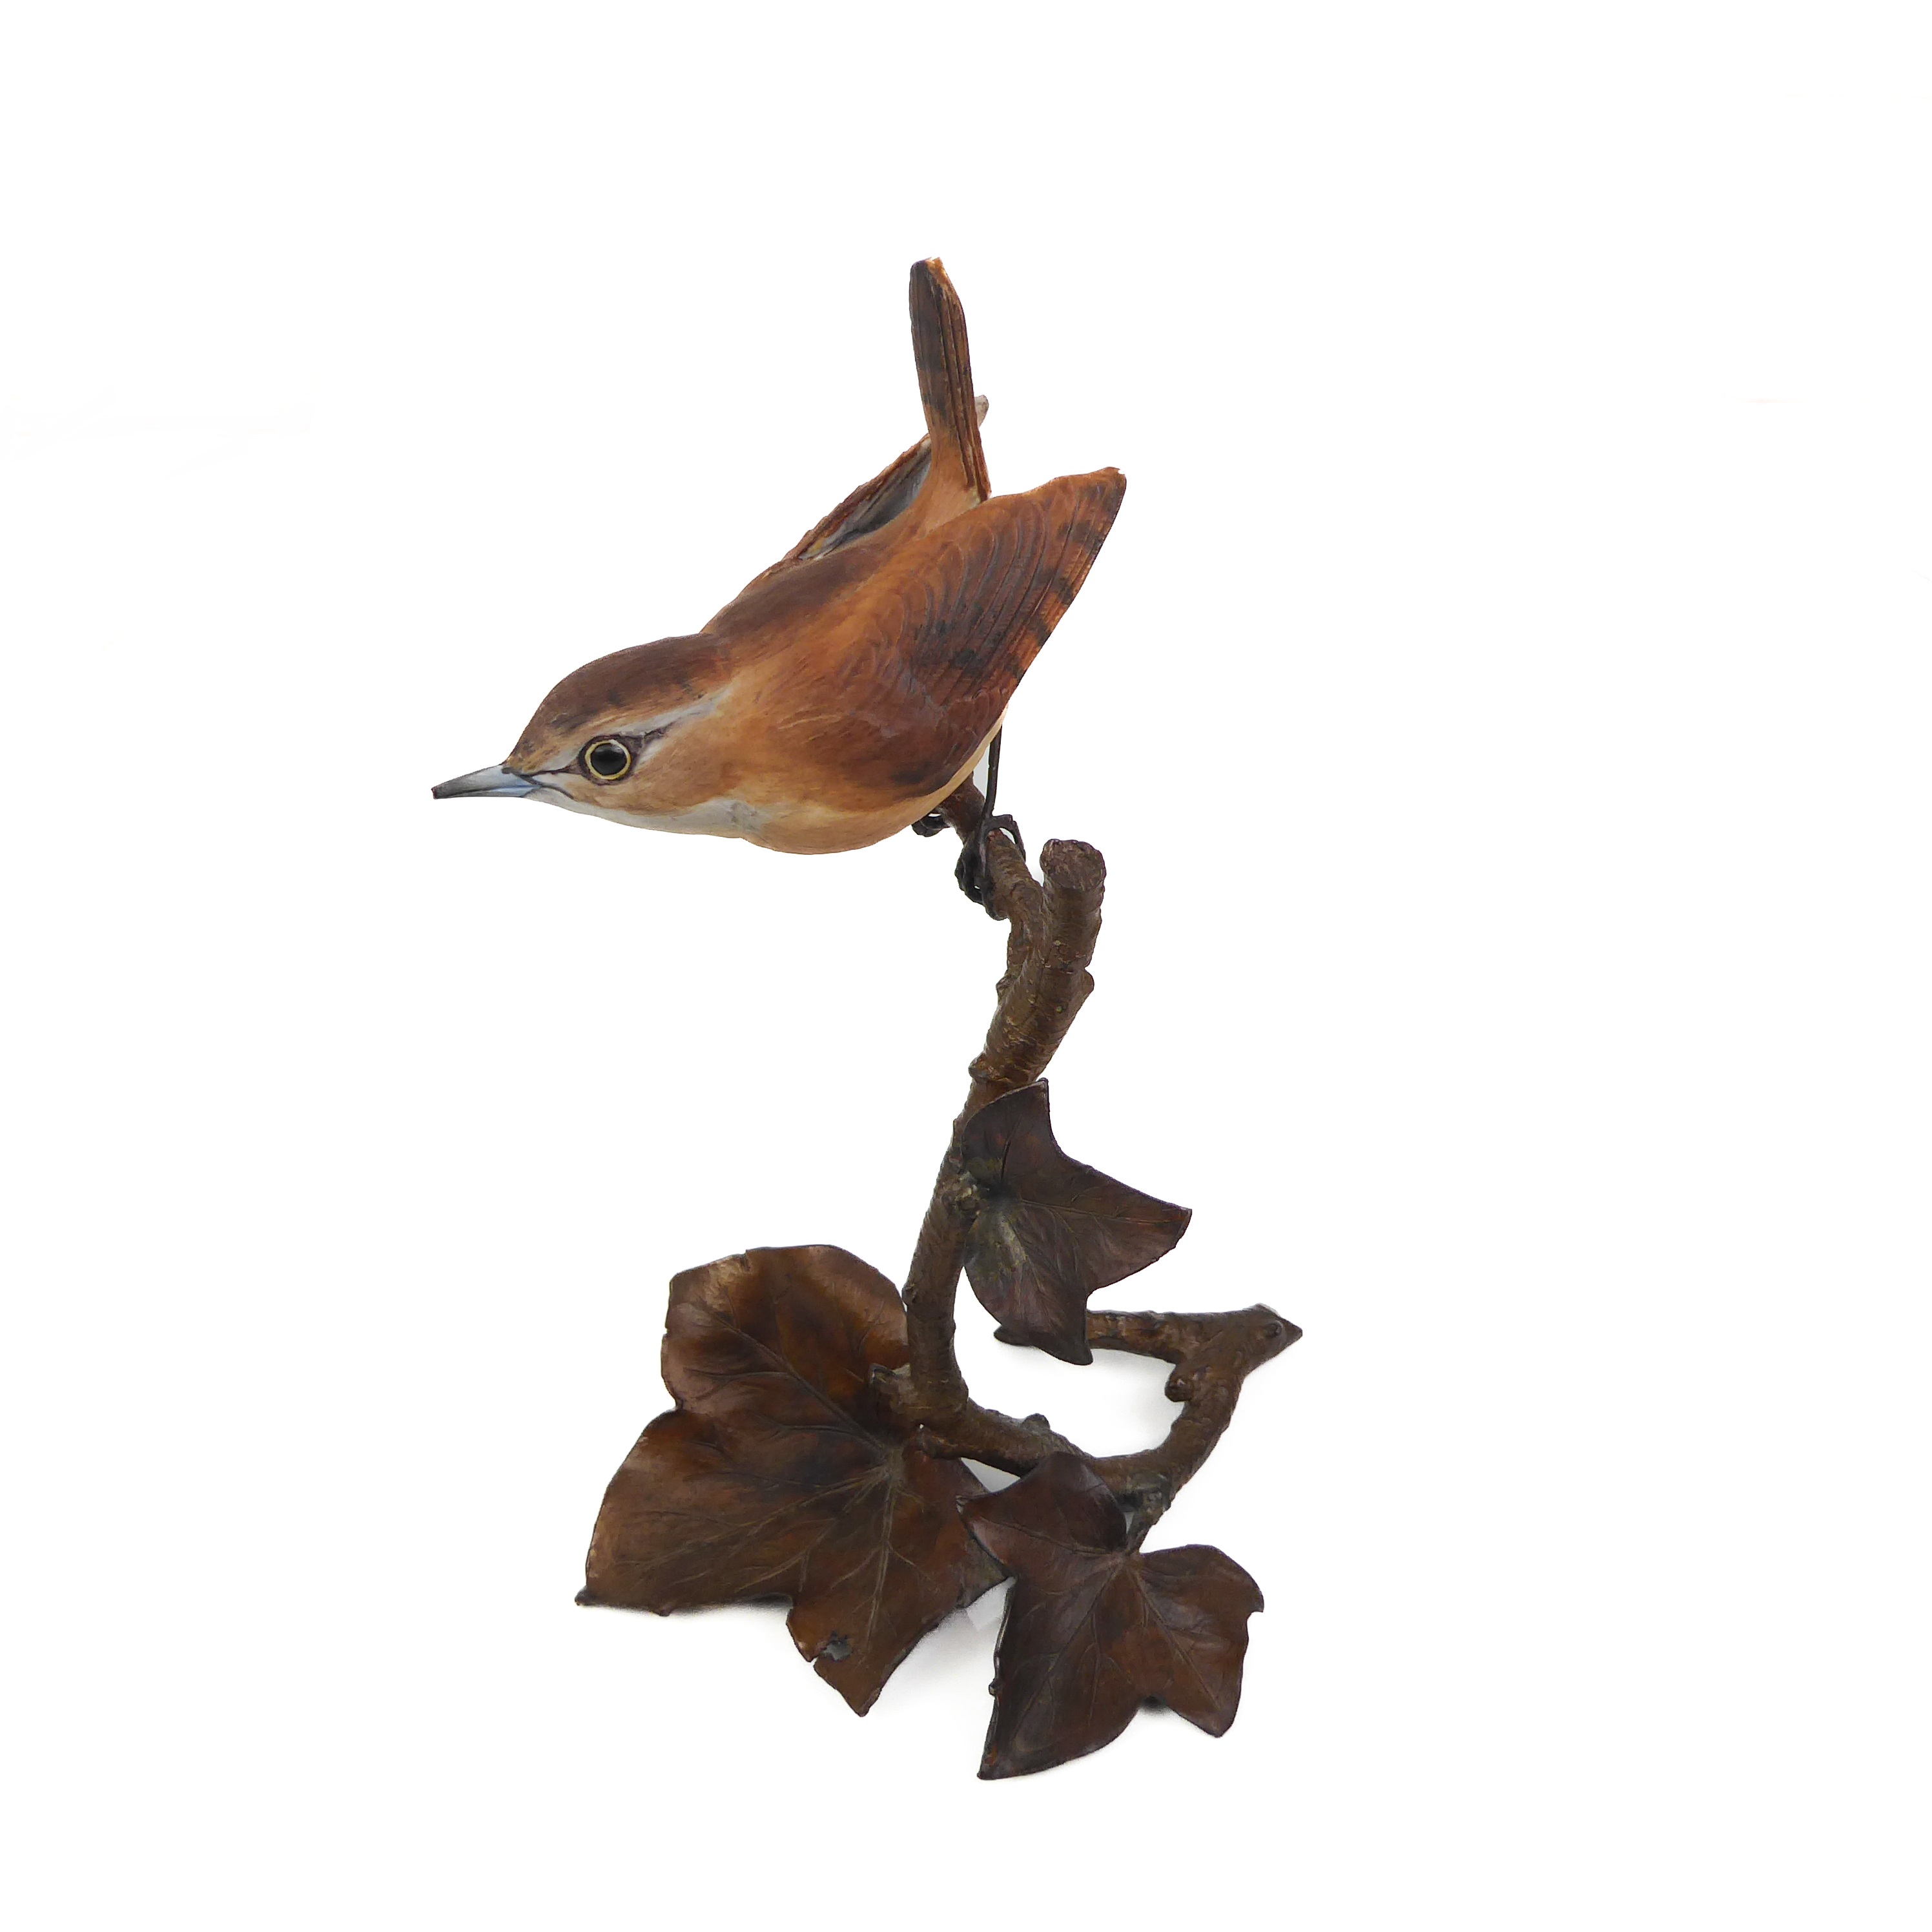 A 20th century cold painted bronze model of a wren setting upon a branch.